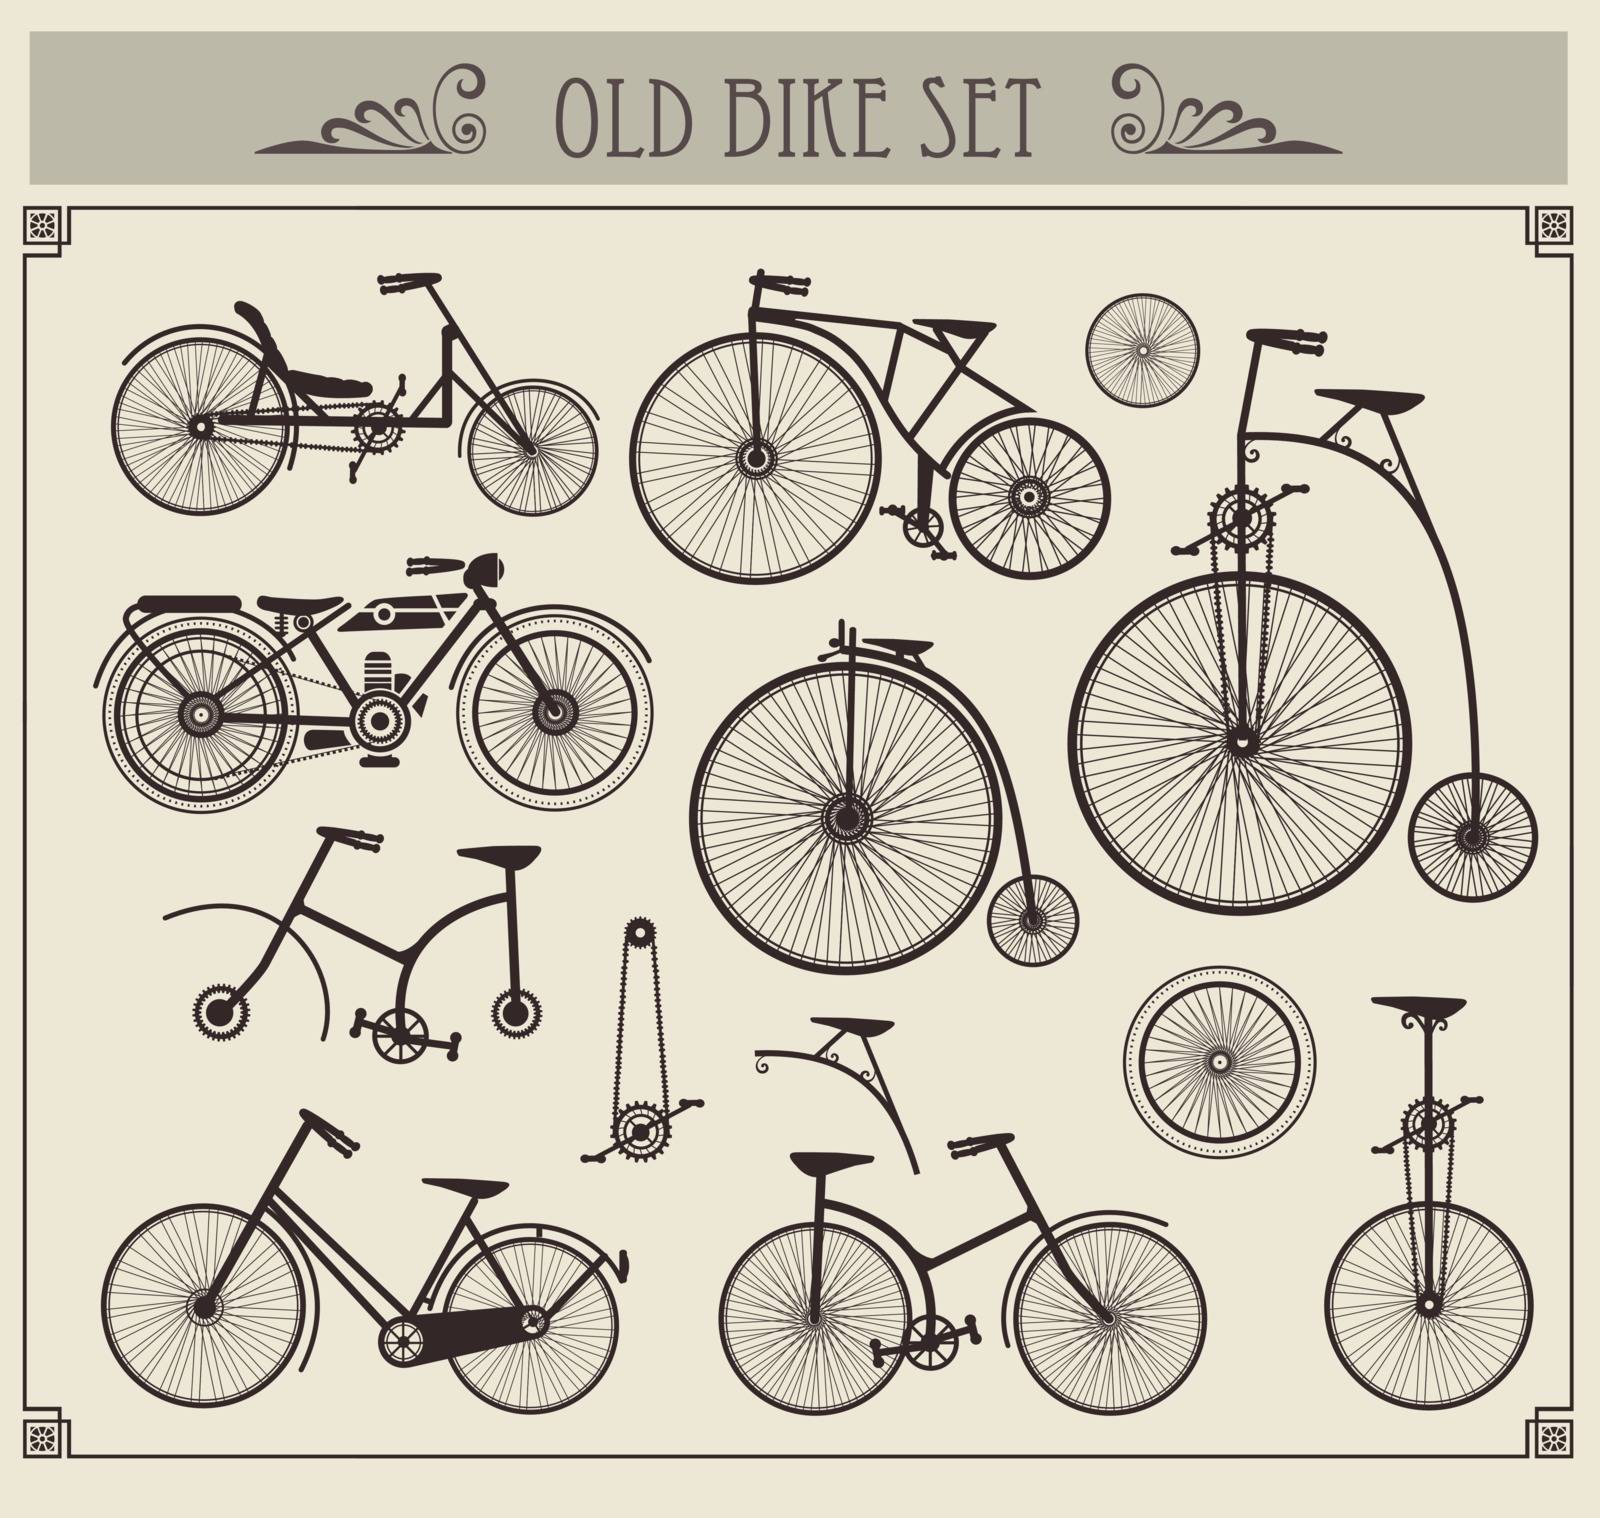 Vector set of old bikes on a gray background